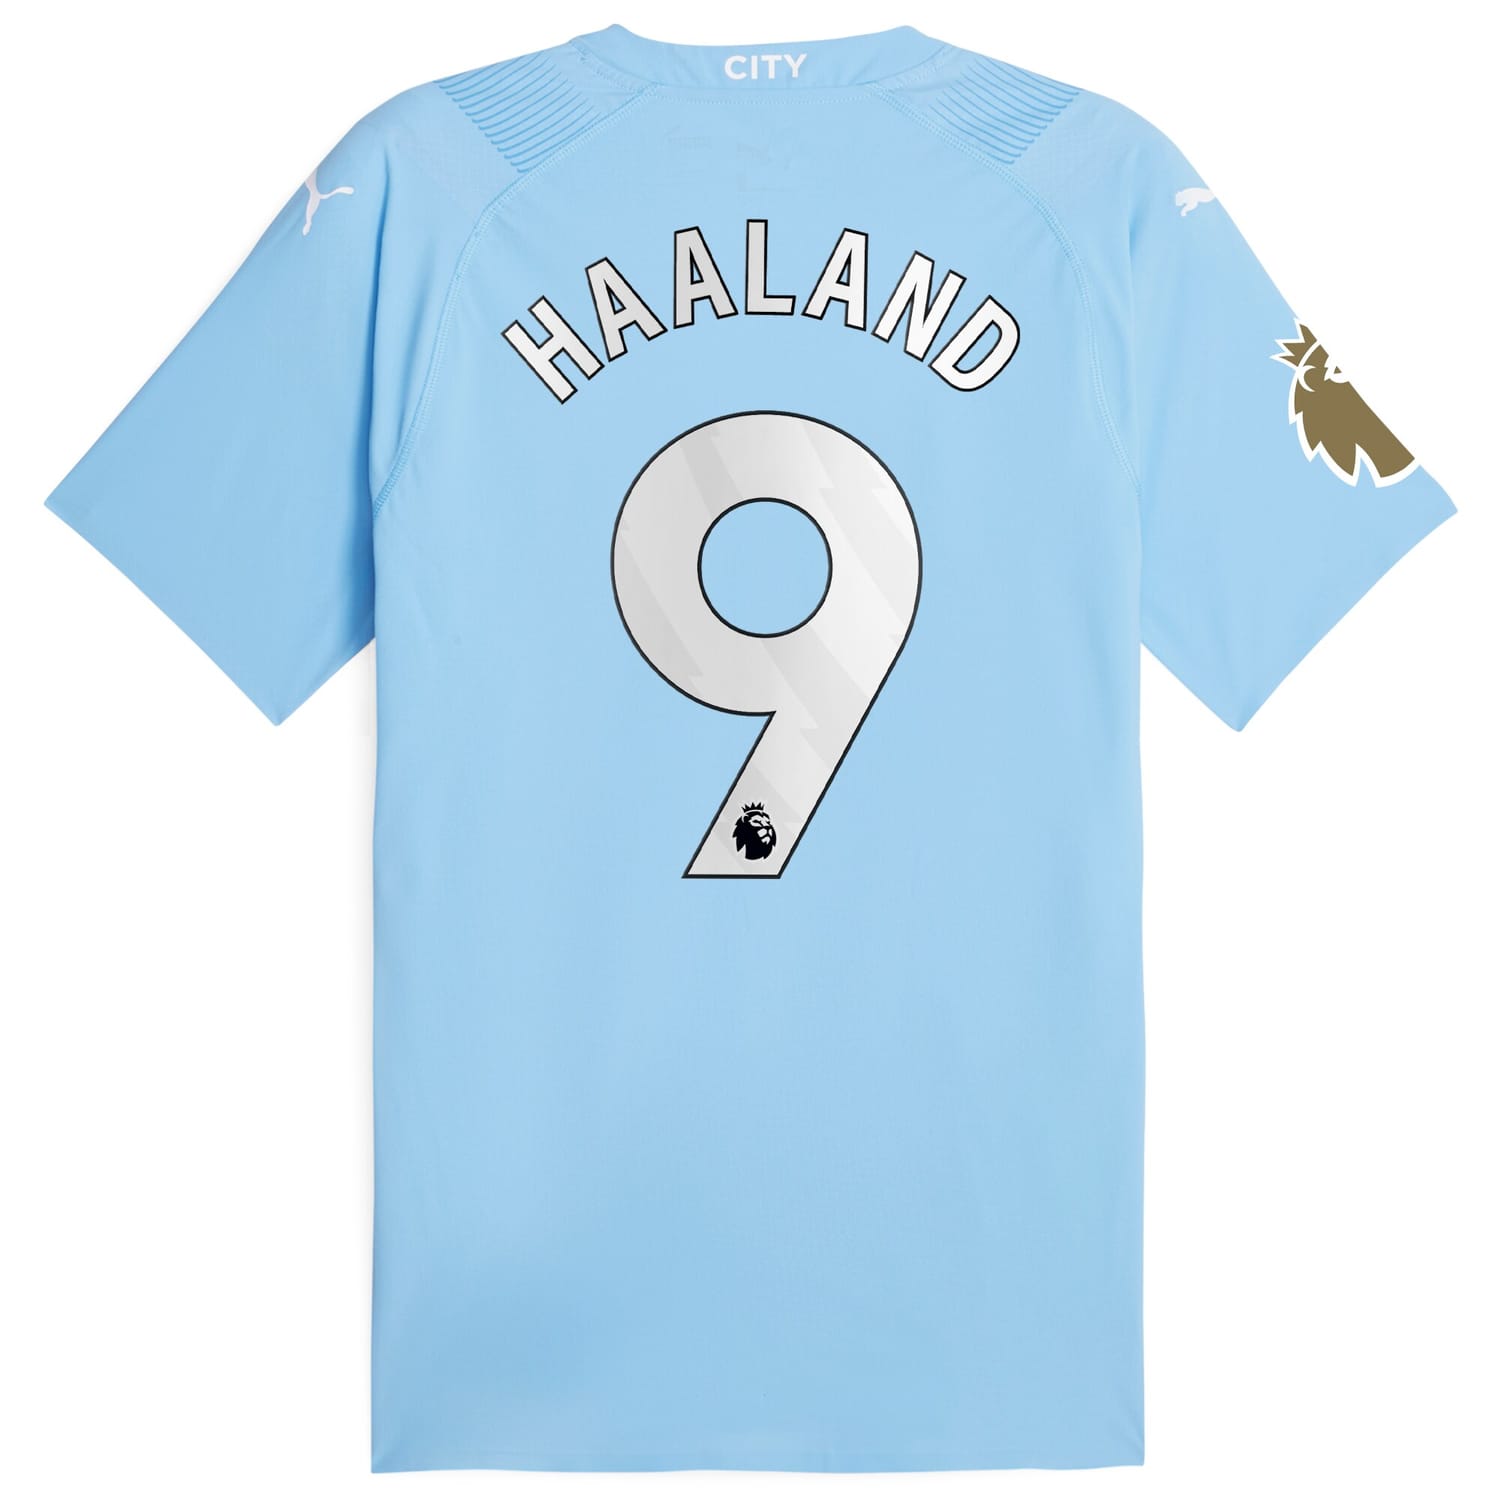 Premier League Manchester City Authentic Jersey Shirt Sky Blue 2023-24 player Erling Haaland printing for Men